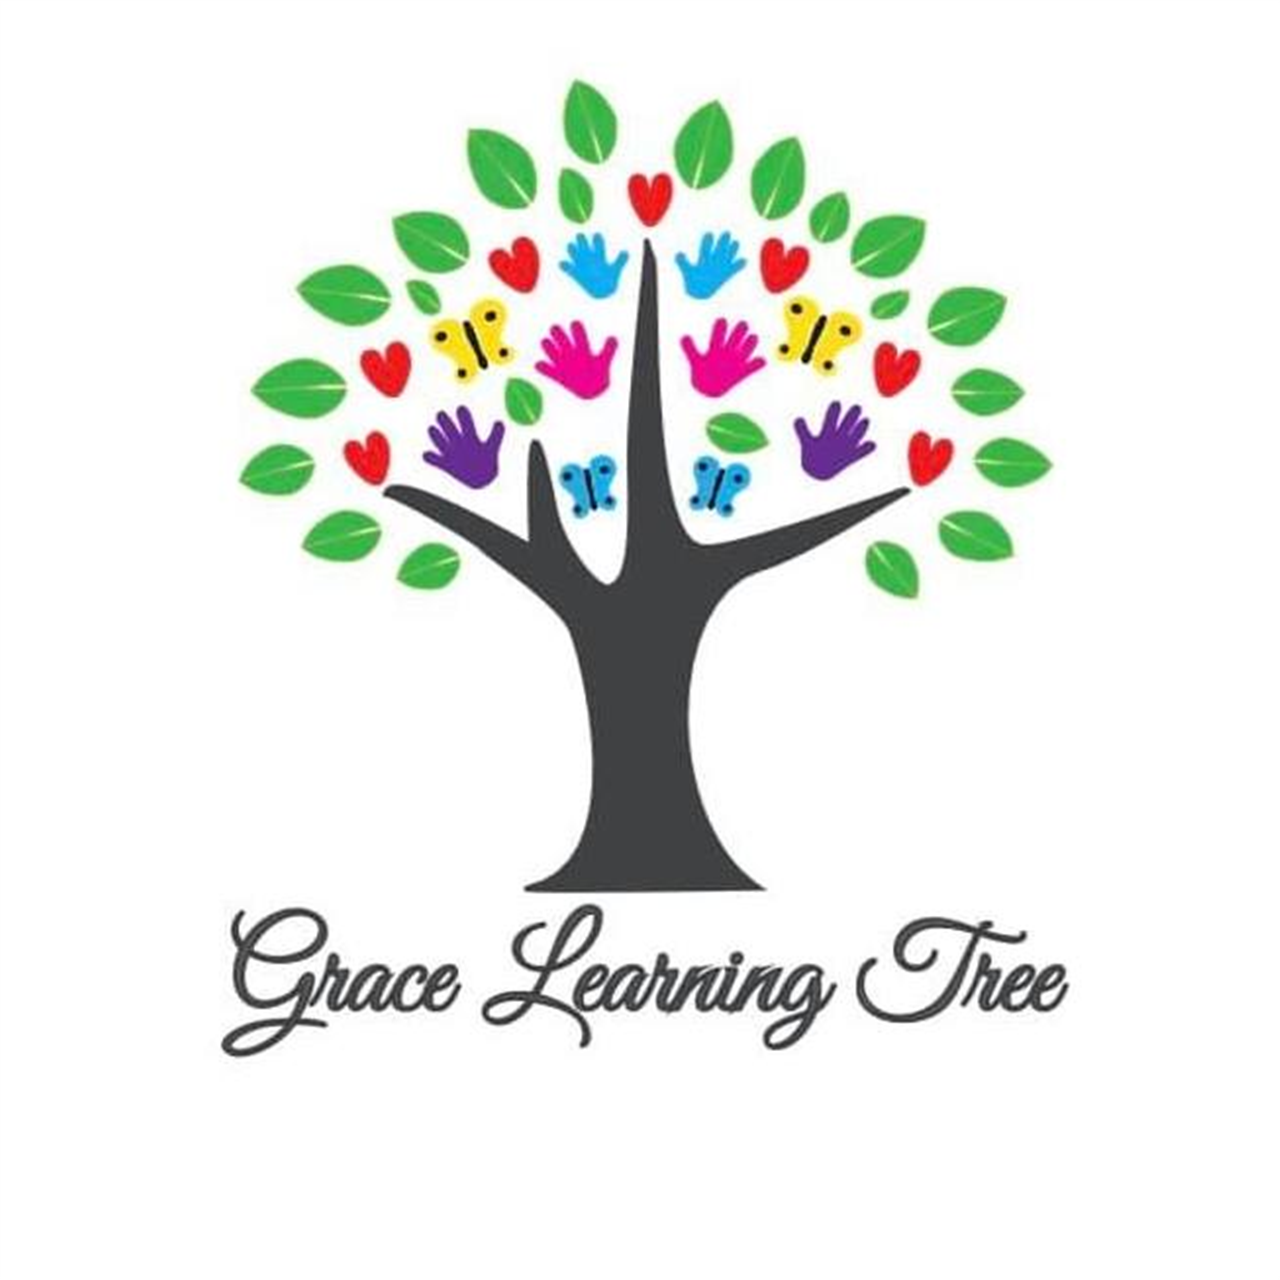 Grace Learning Tree: Classic